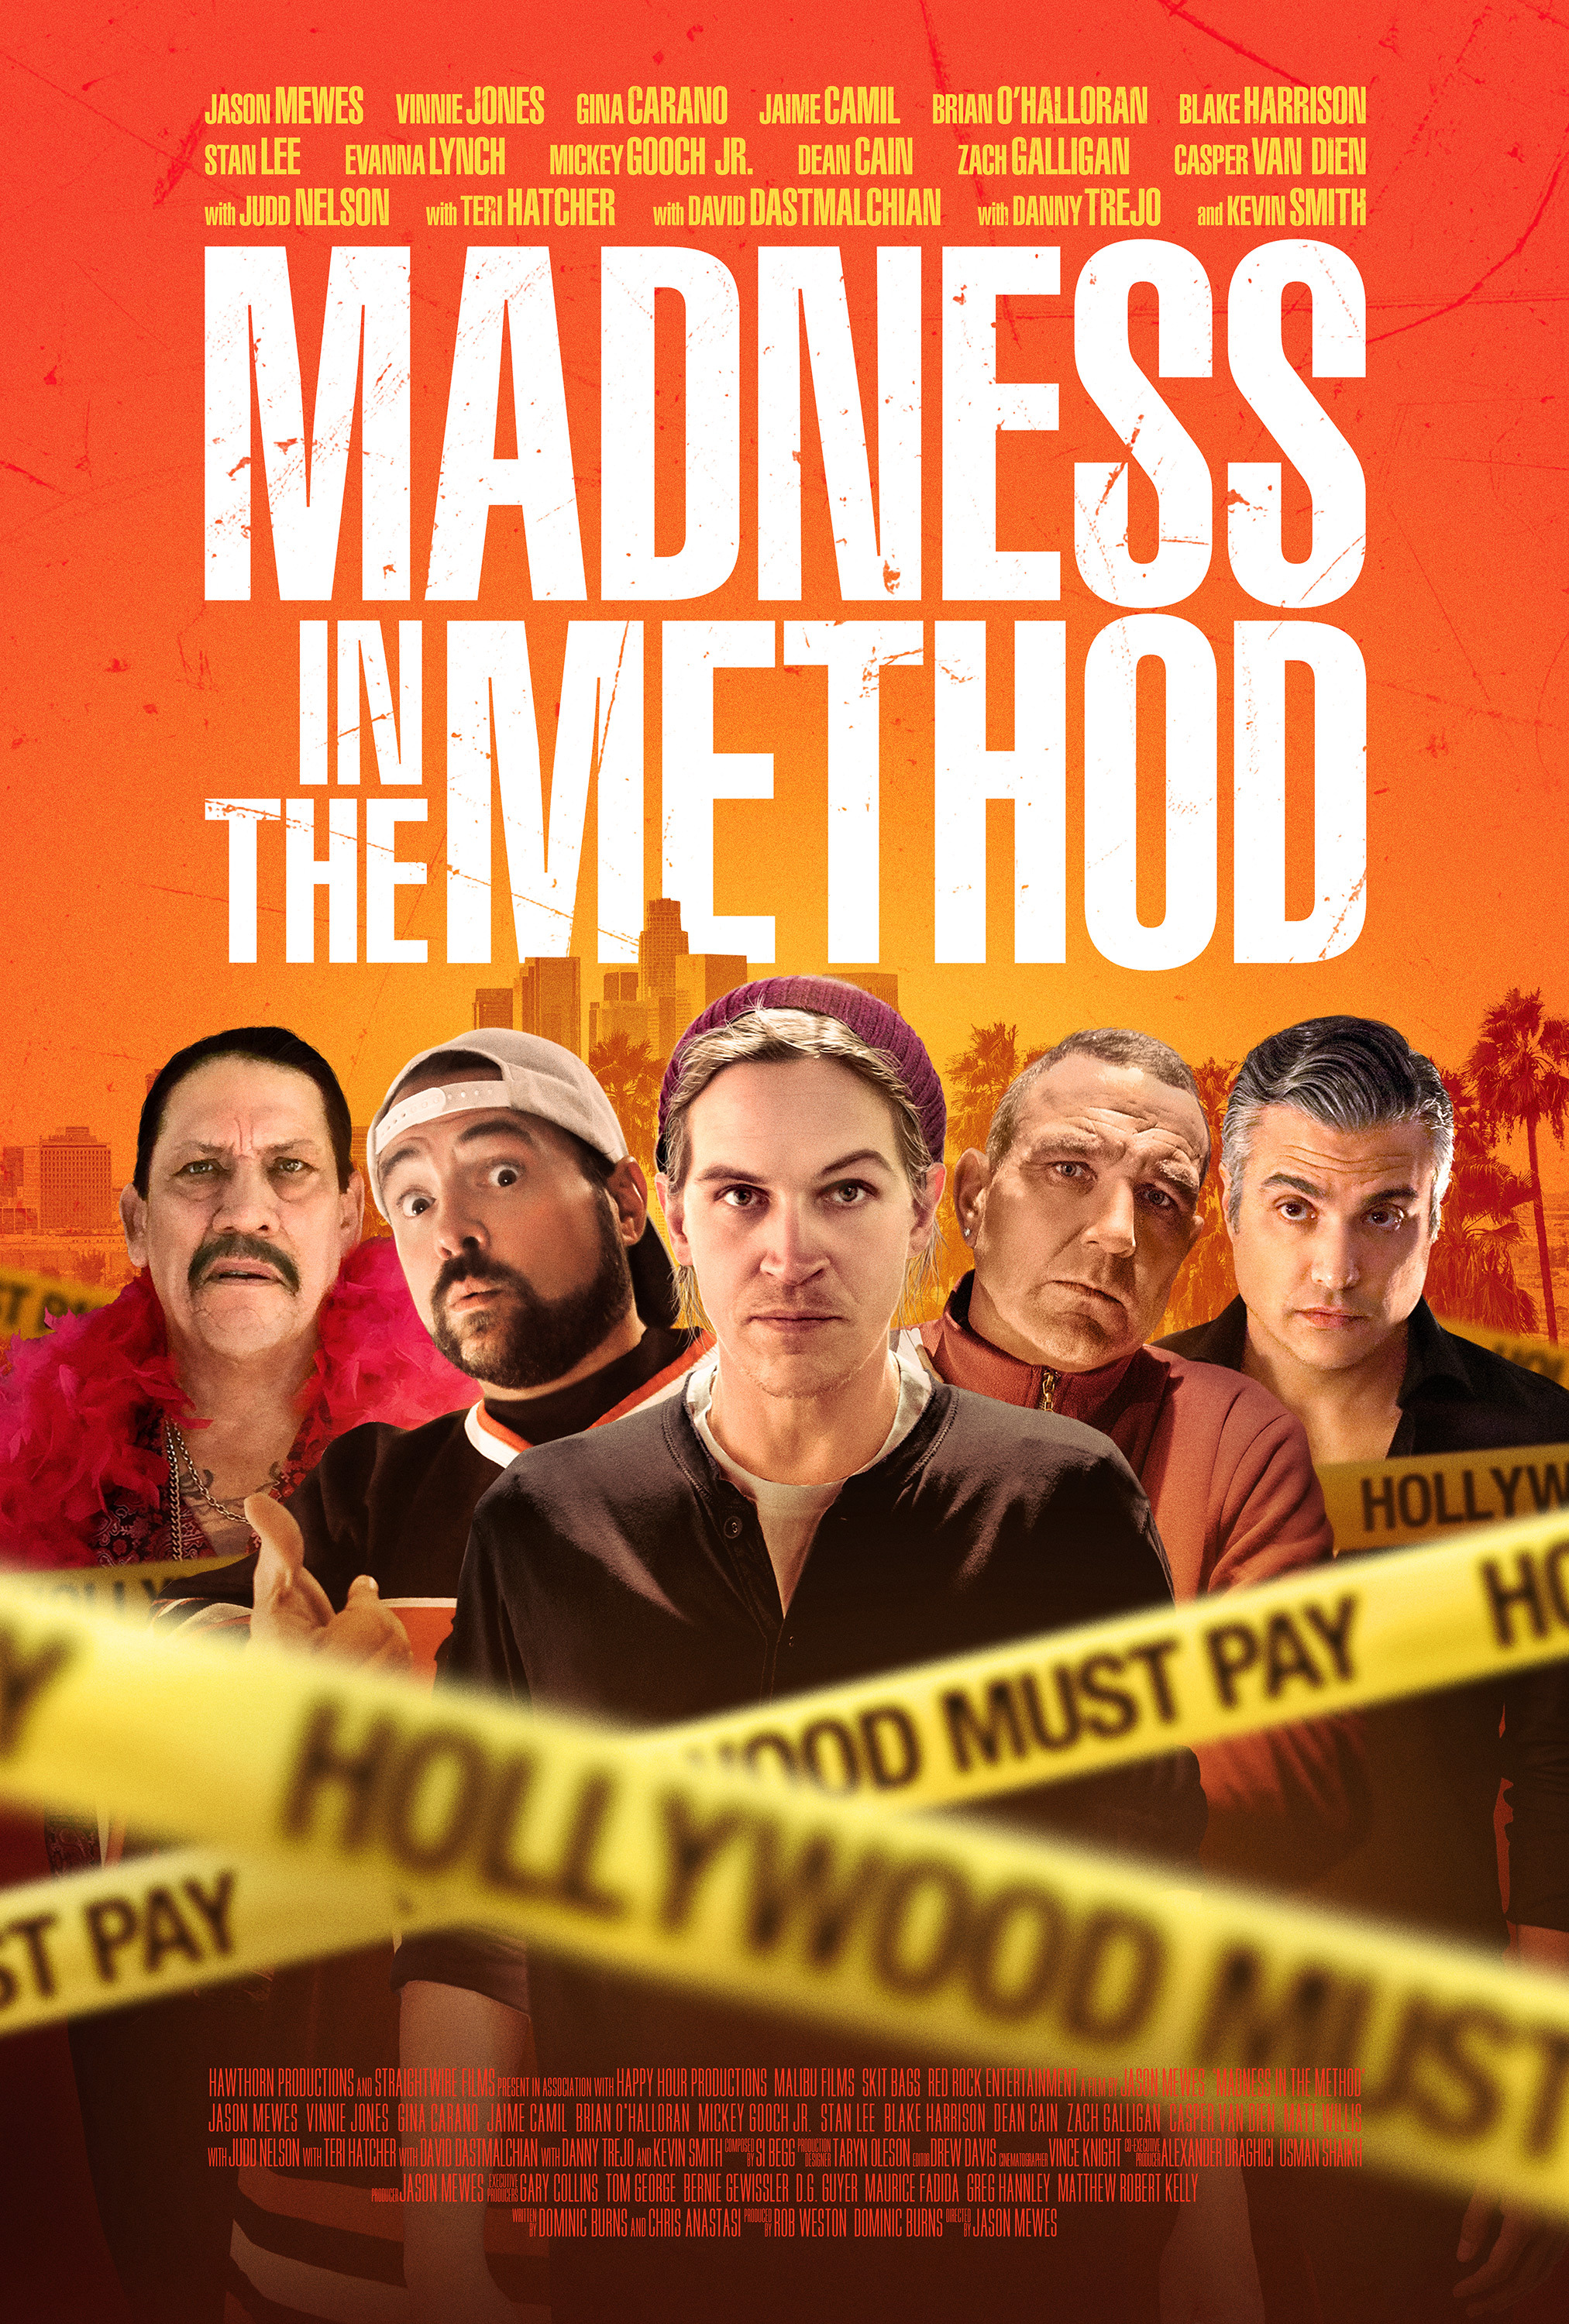 Mega Sized Movie Poster Image for Madness in the Method 